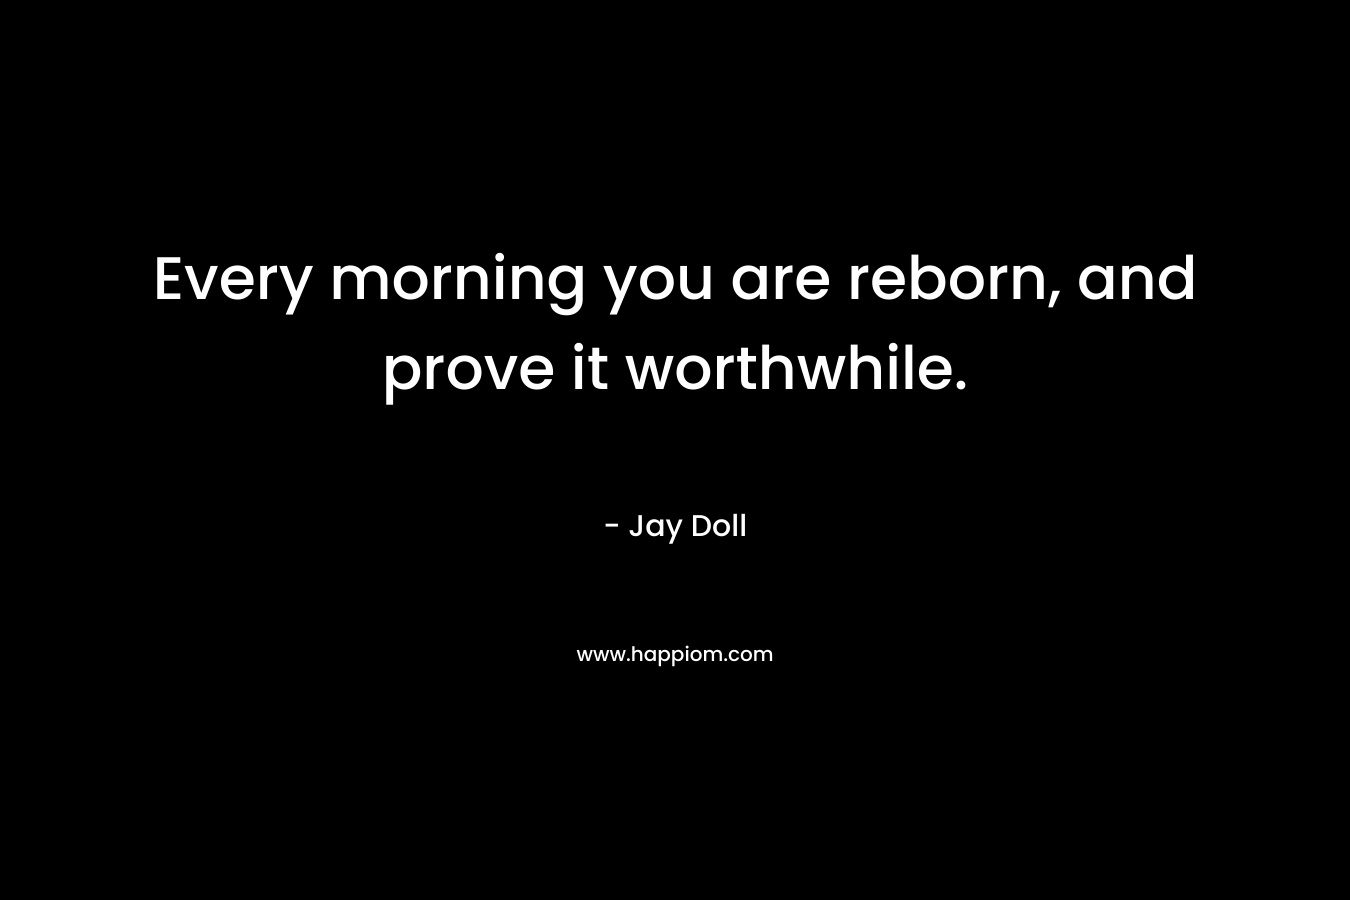 Every morning you are reborn, and prove it worthwhile. – Jay Doll